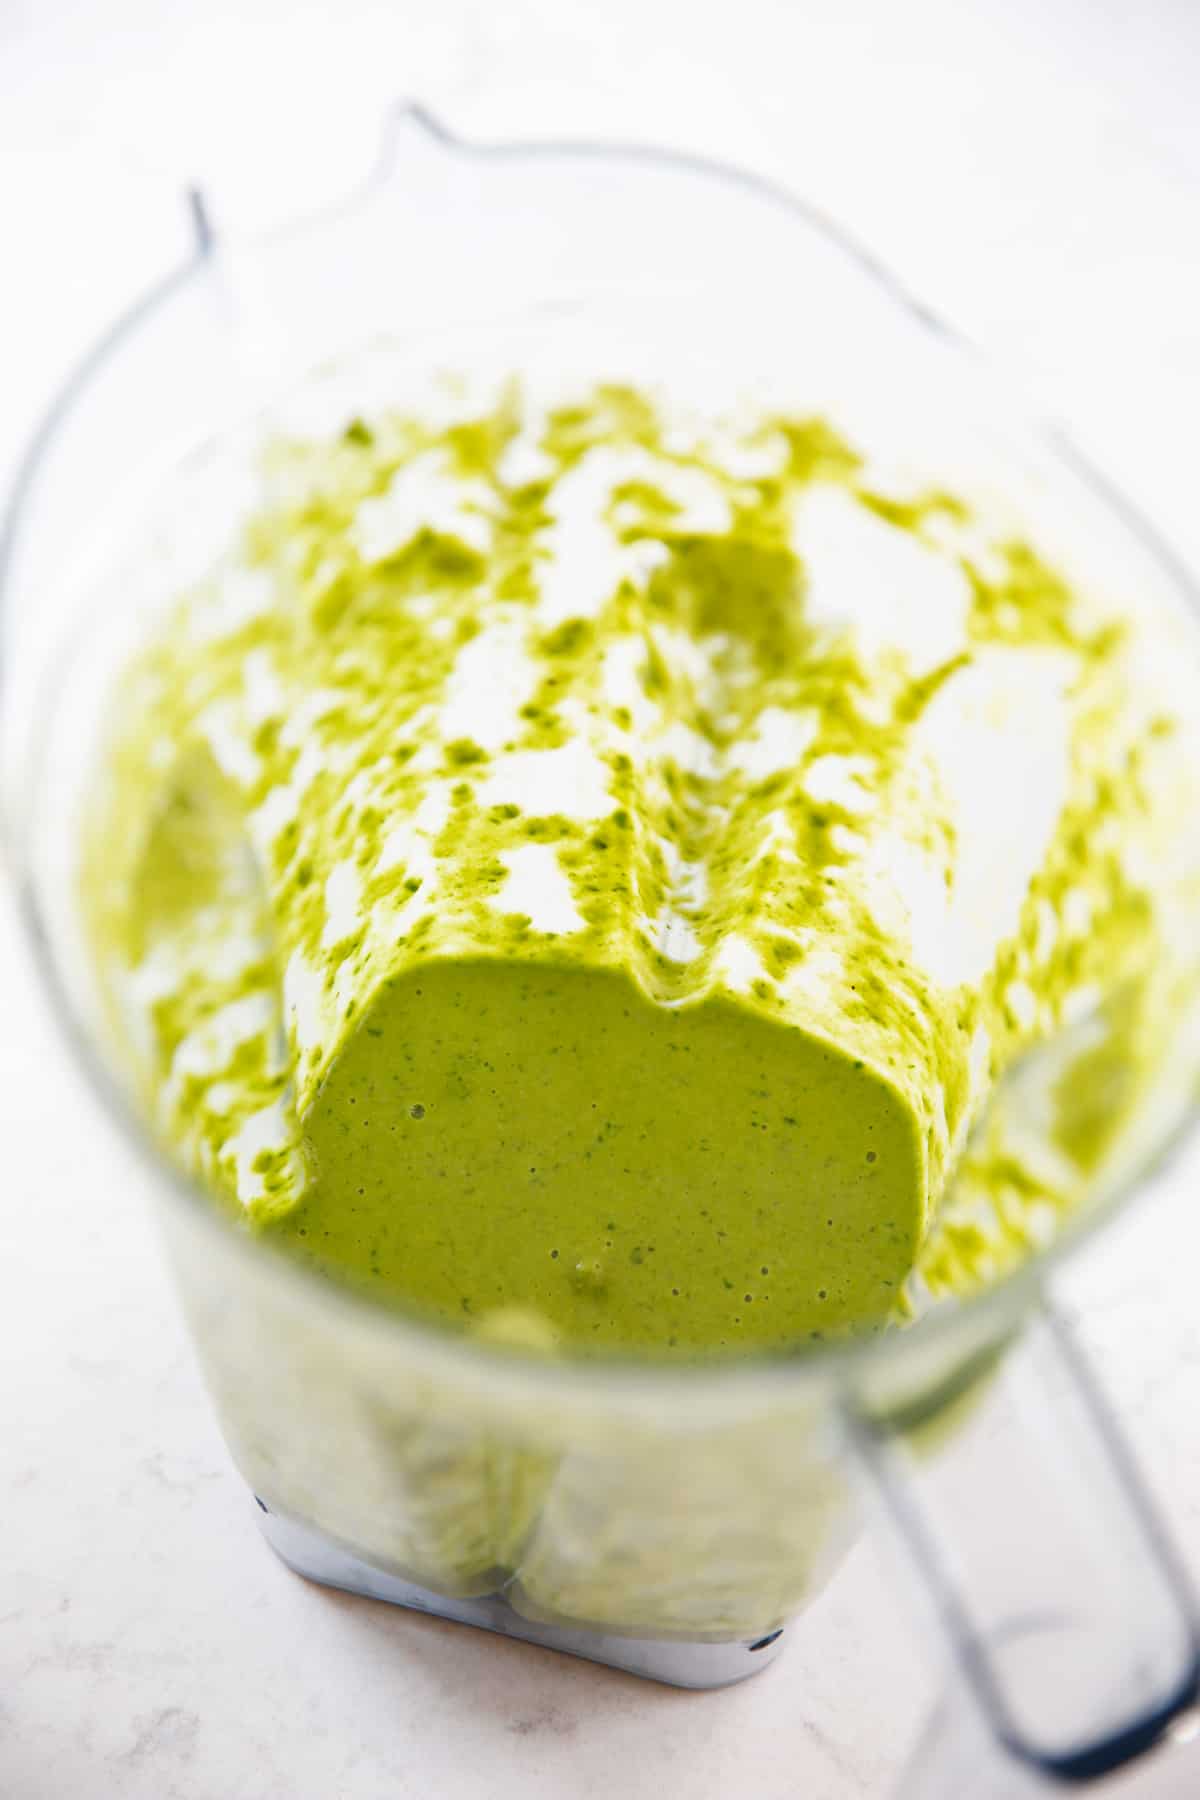 A blender with green pancake batter from spinach.